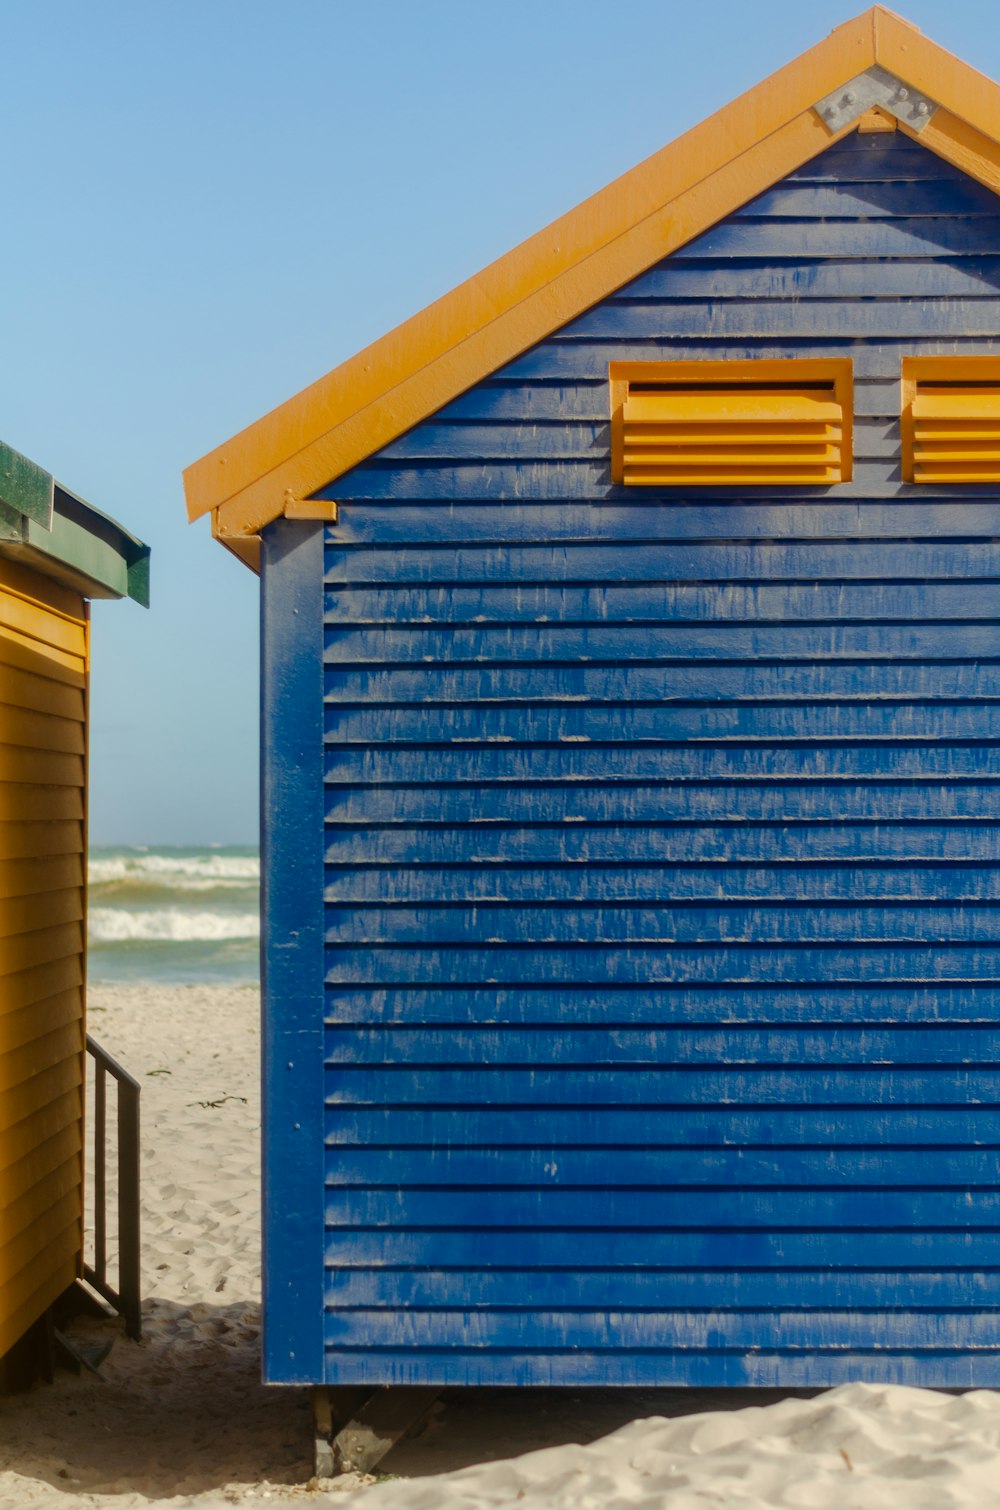 a blue and yellow beach hut sitting on top of a sandy beach